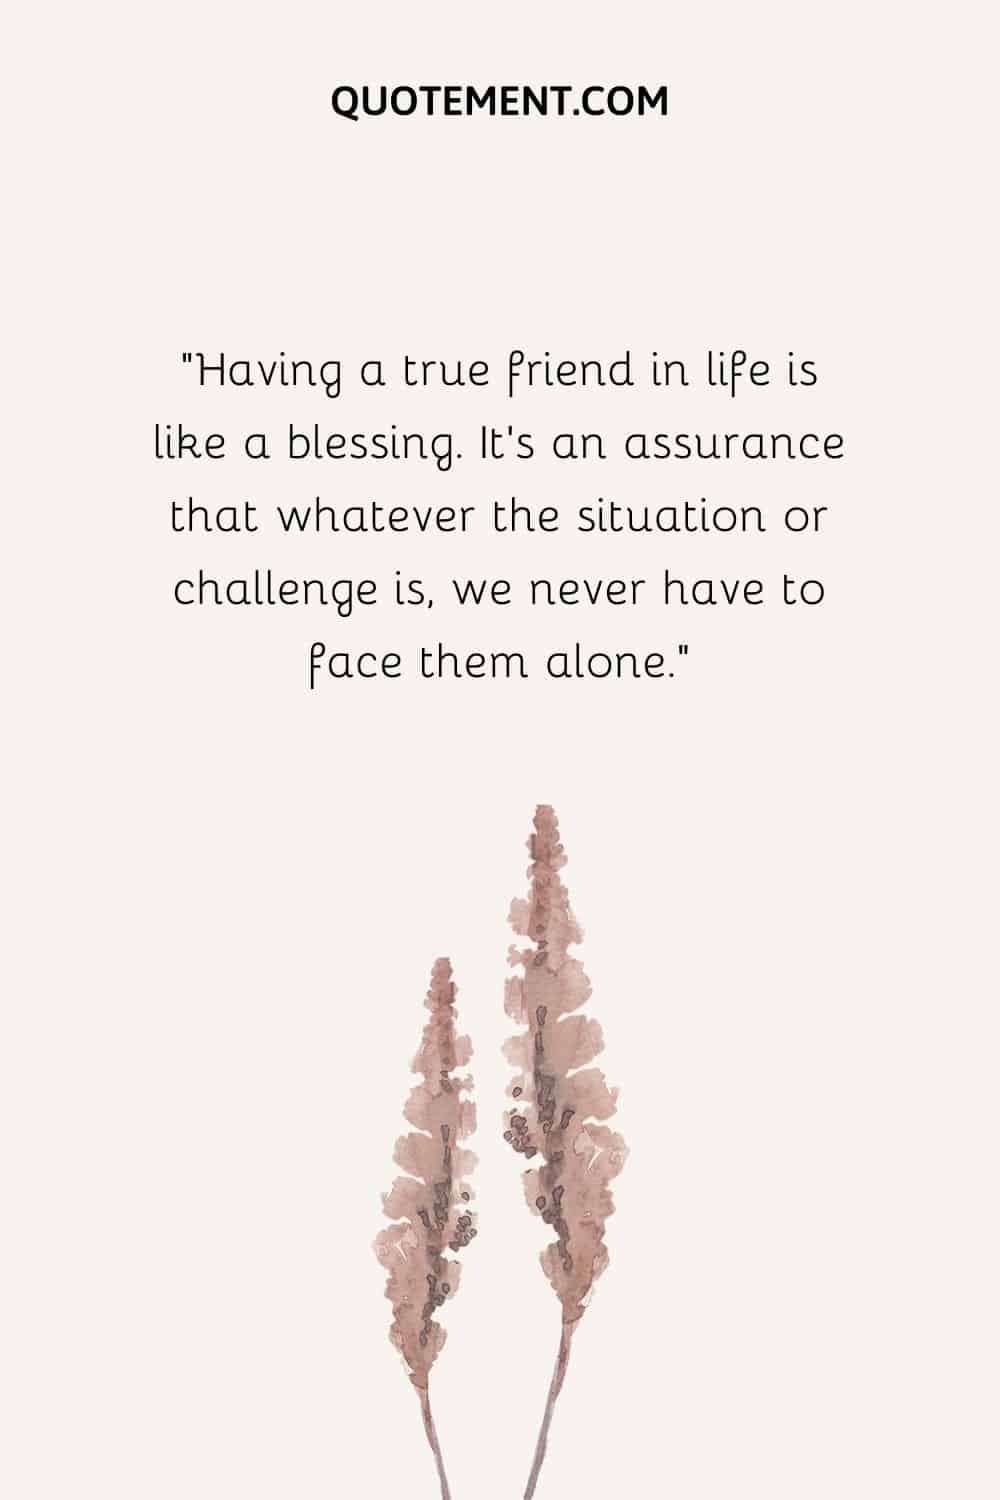 Having a true friend in life is like a blessing. It's an assurance that whatever the situation or challenge is, we never have to face them alone.